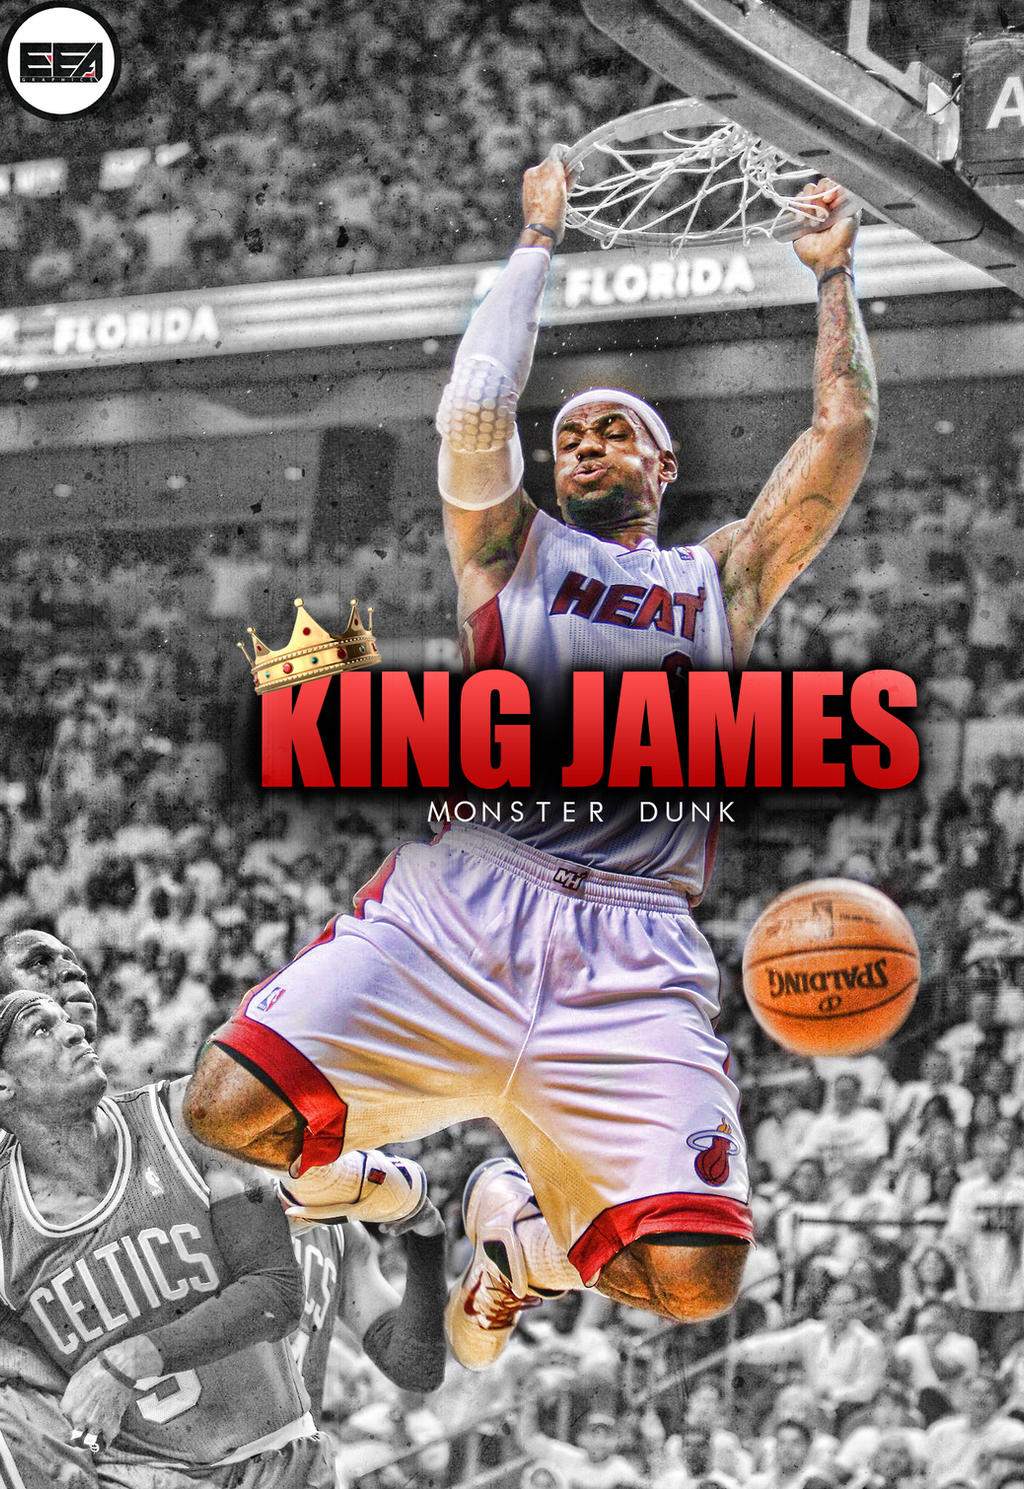 Lebron Dunking Wallpapers